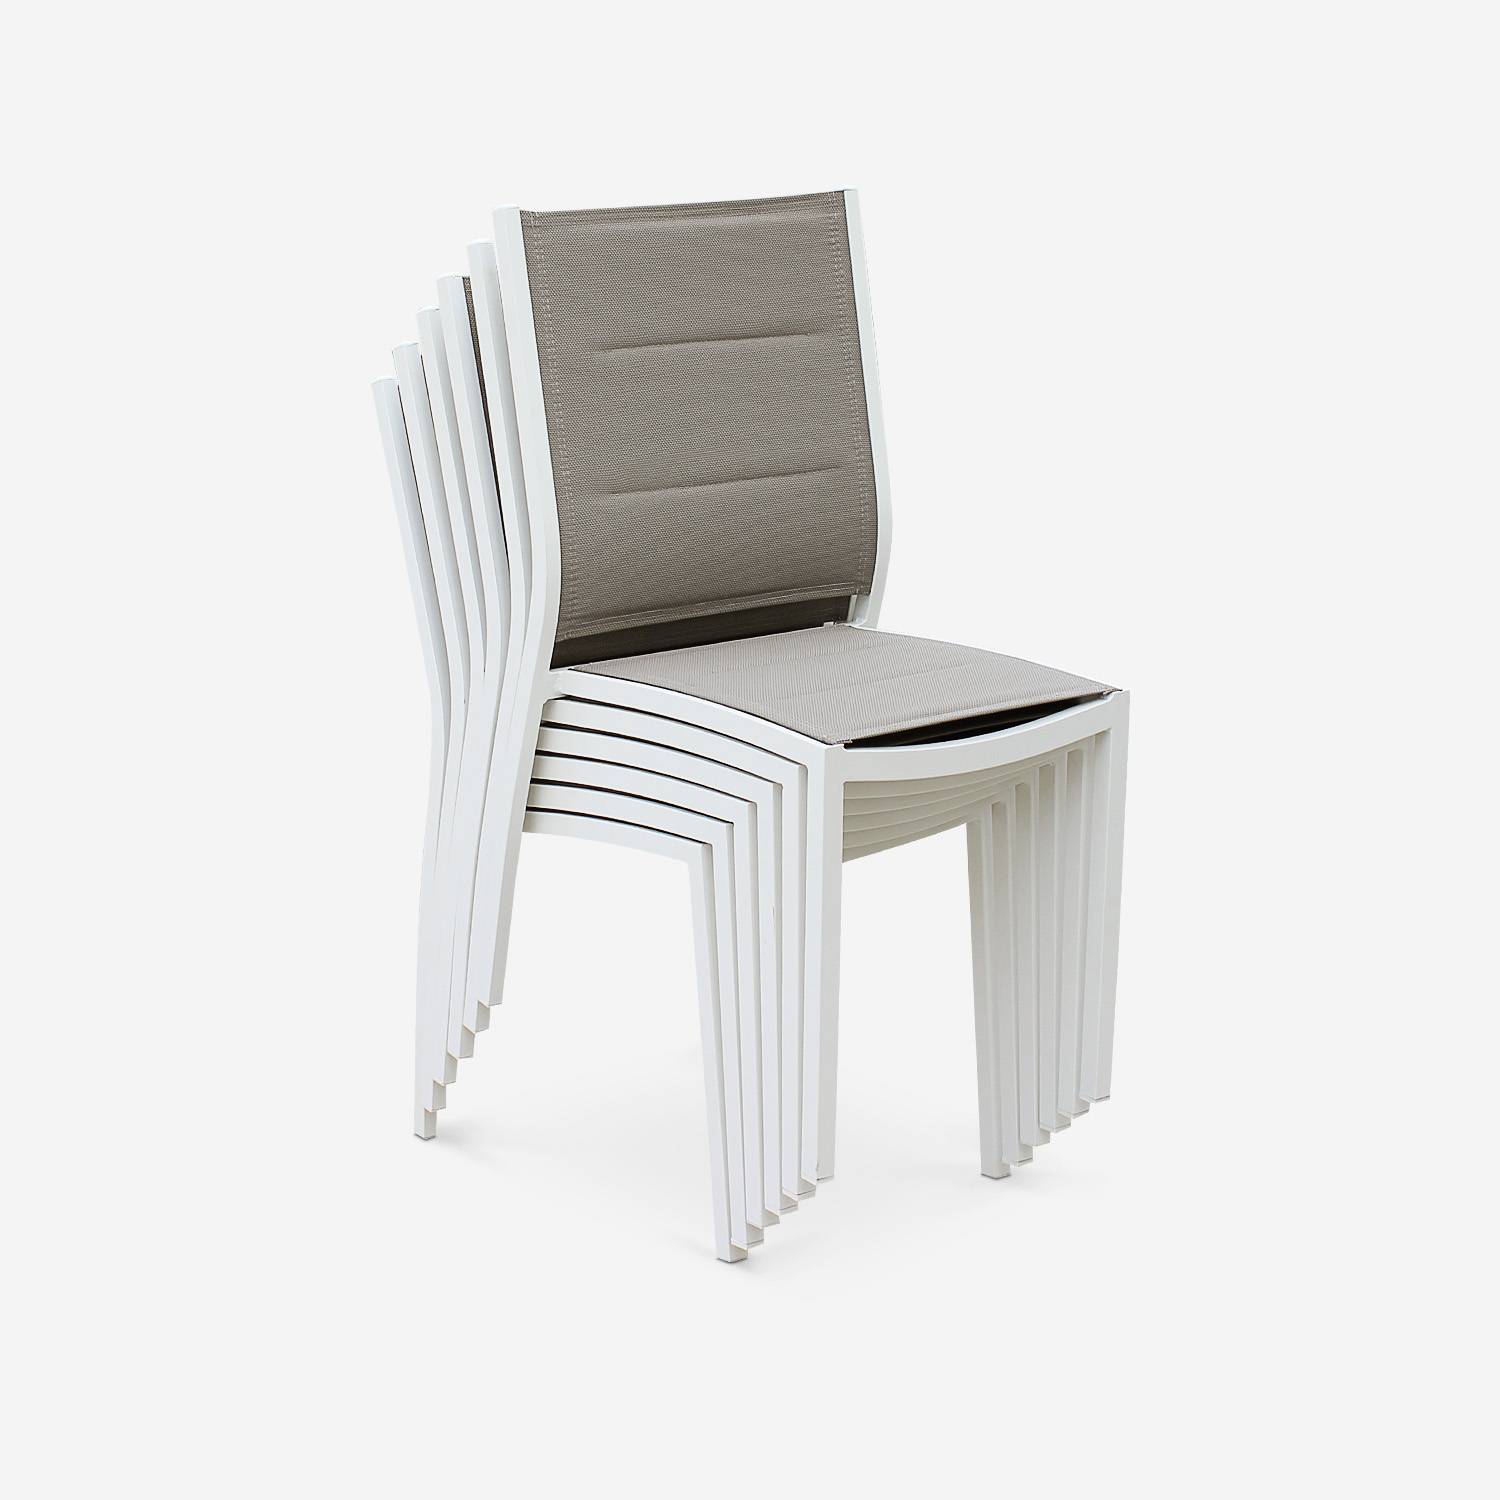 Set of 2 stackable chairs - Chicago - White aluminium and Beige-Brown textilene Photo4